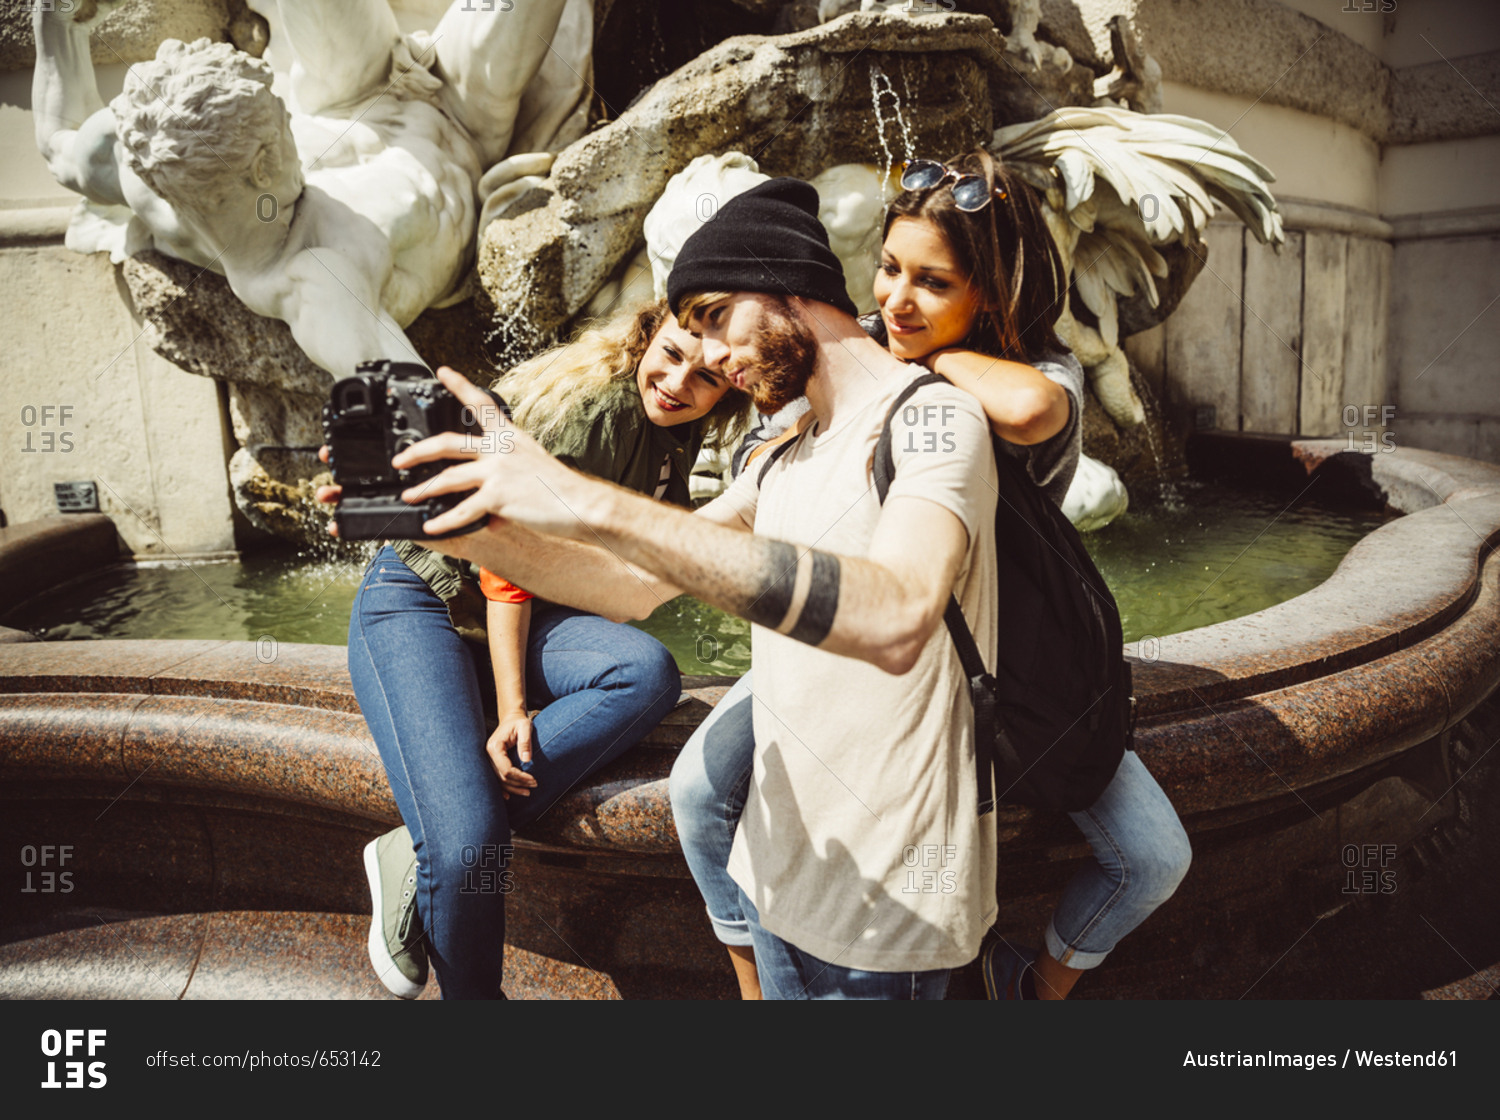 Austria- Vienna- group of three friends taking a selfie in front of fountain at Hofburg Palace